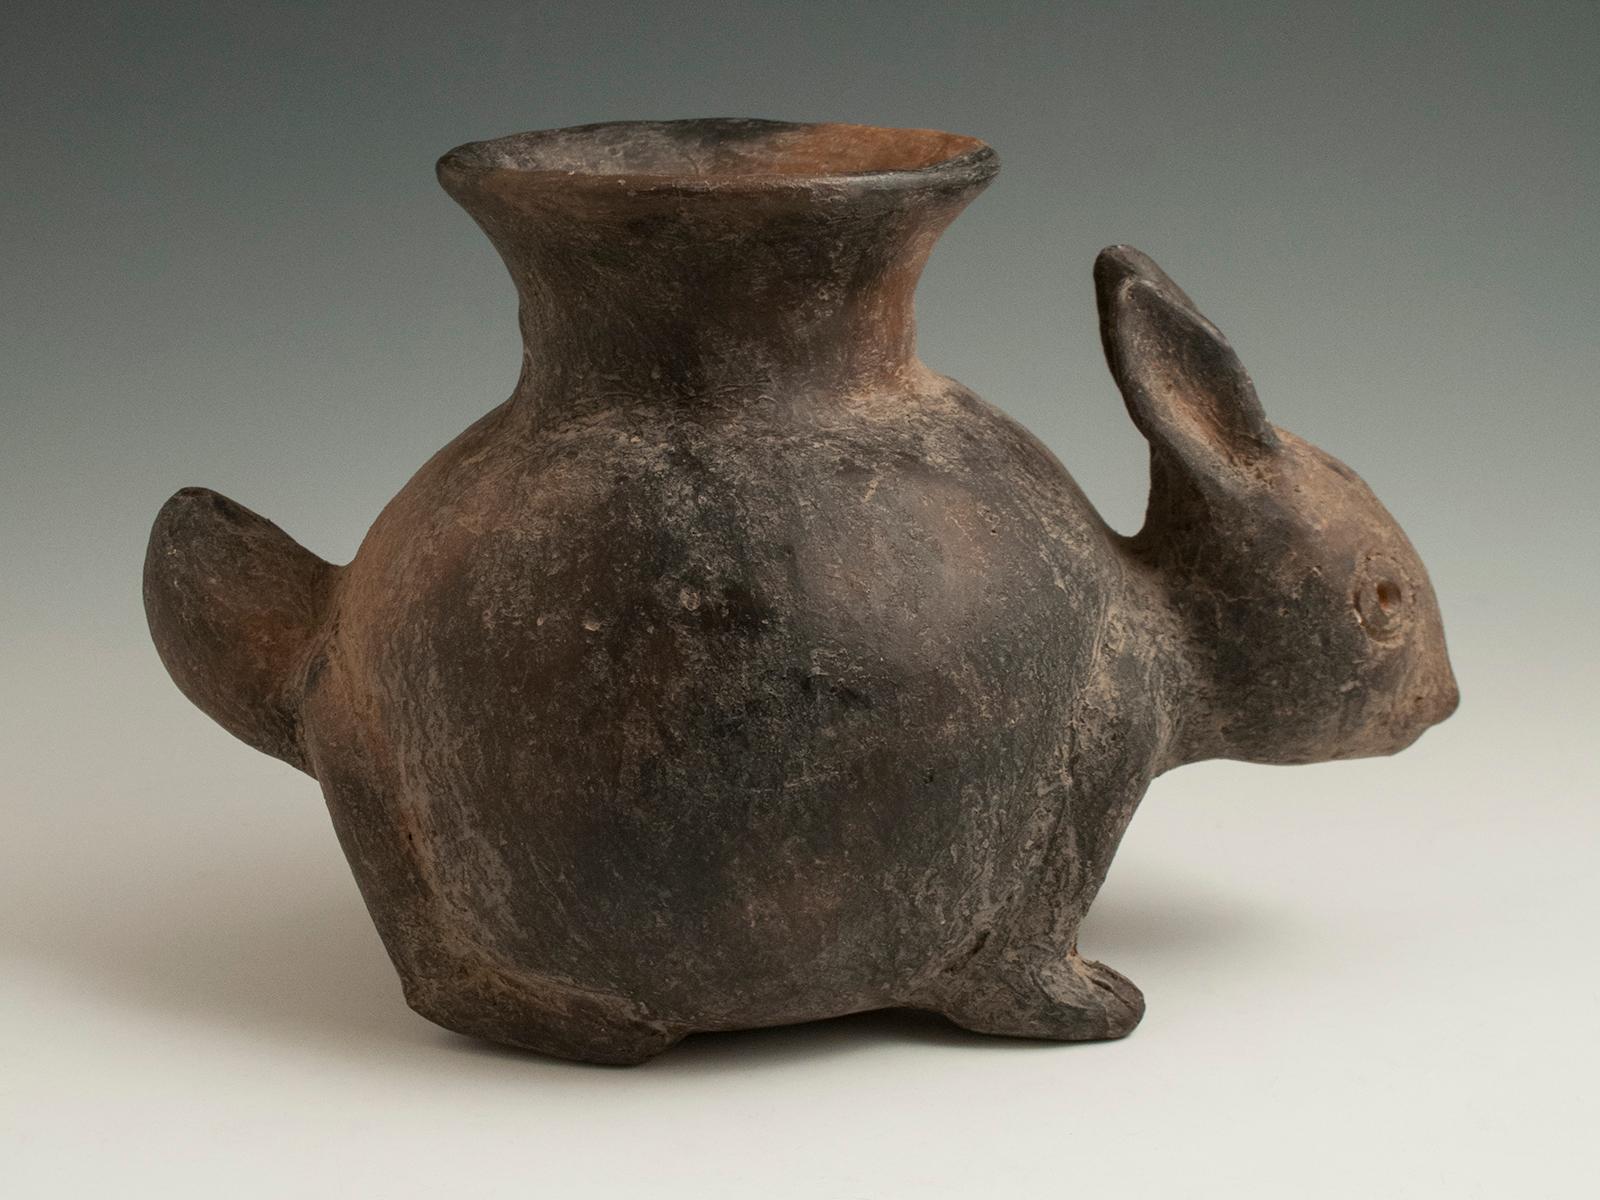 Tribal Earthenware Rabbit Vessel, Possibly Colima, West Mexico